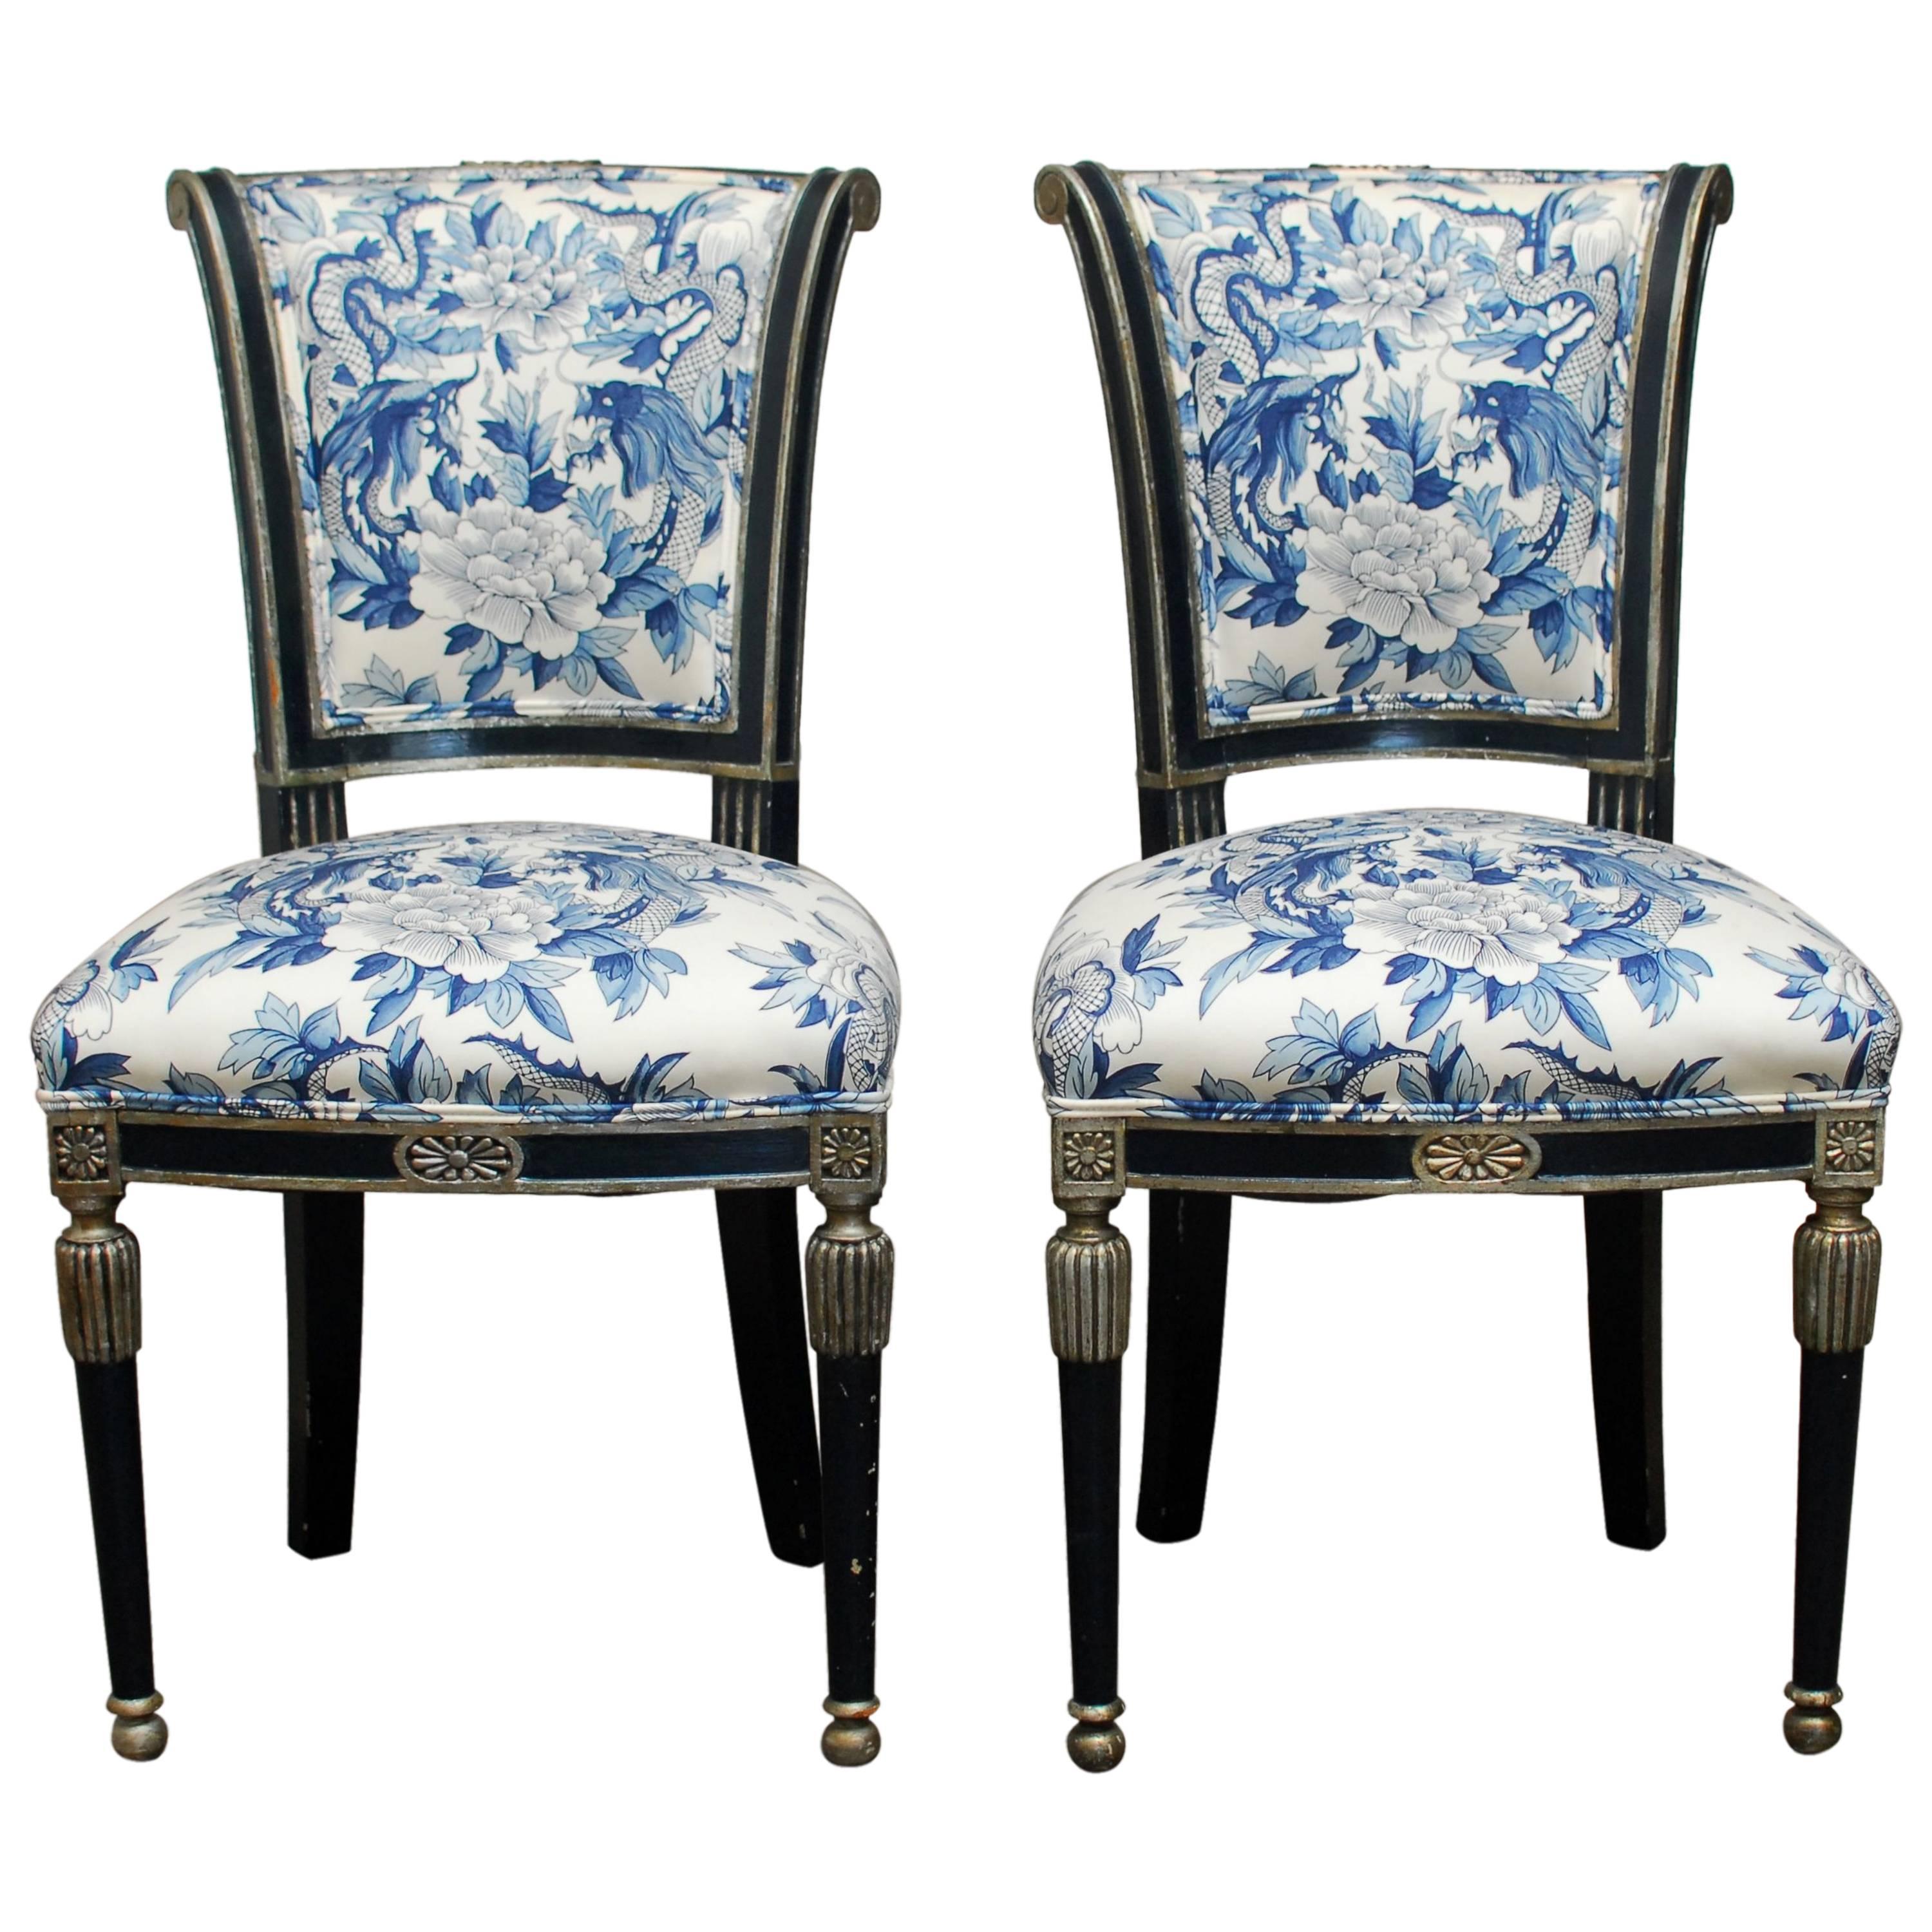 French Directoire Style Chairs with Chinoiserie Dragon Upholstery